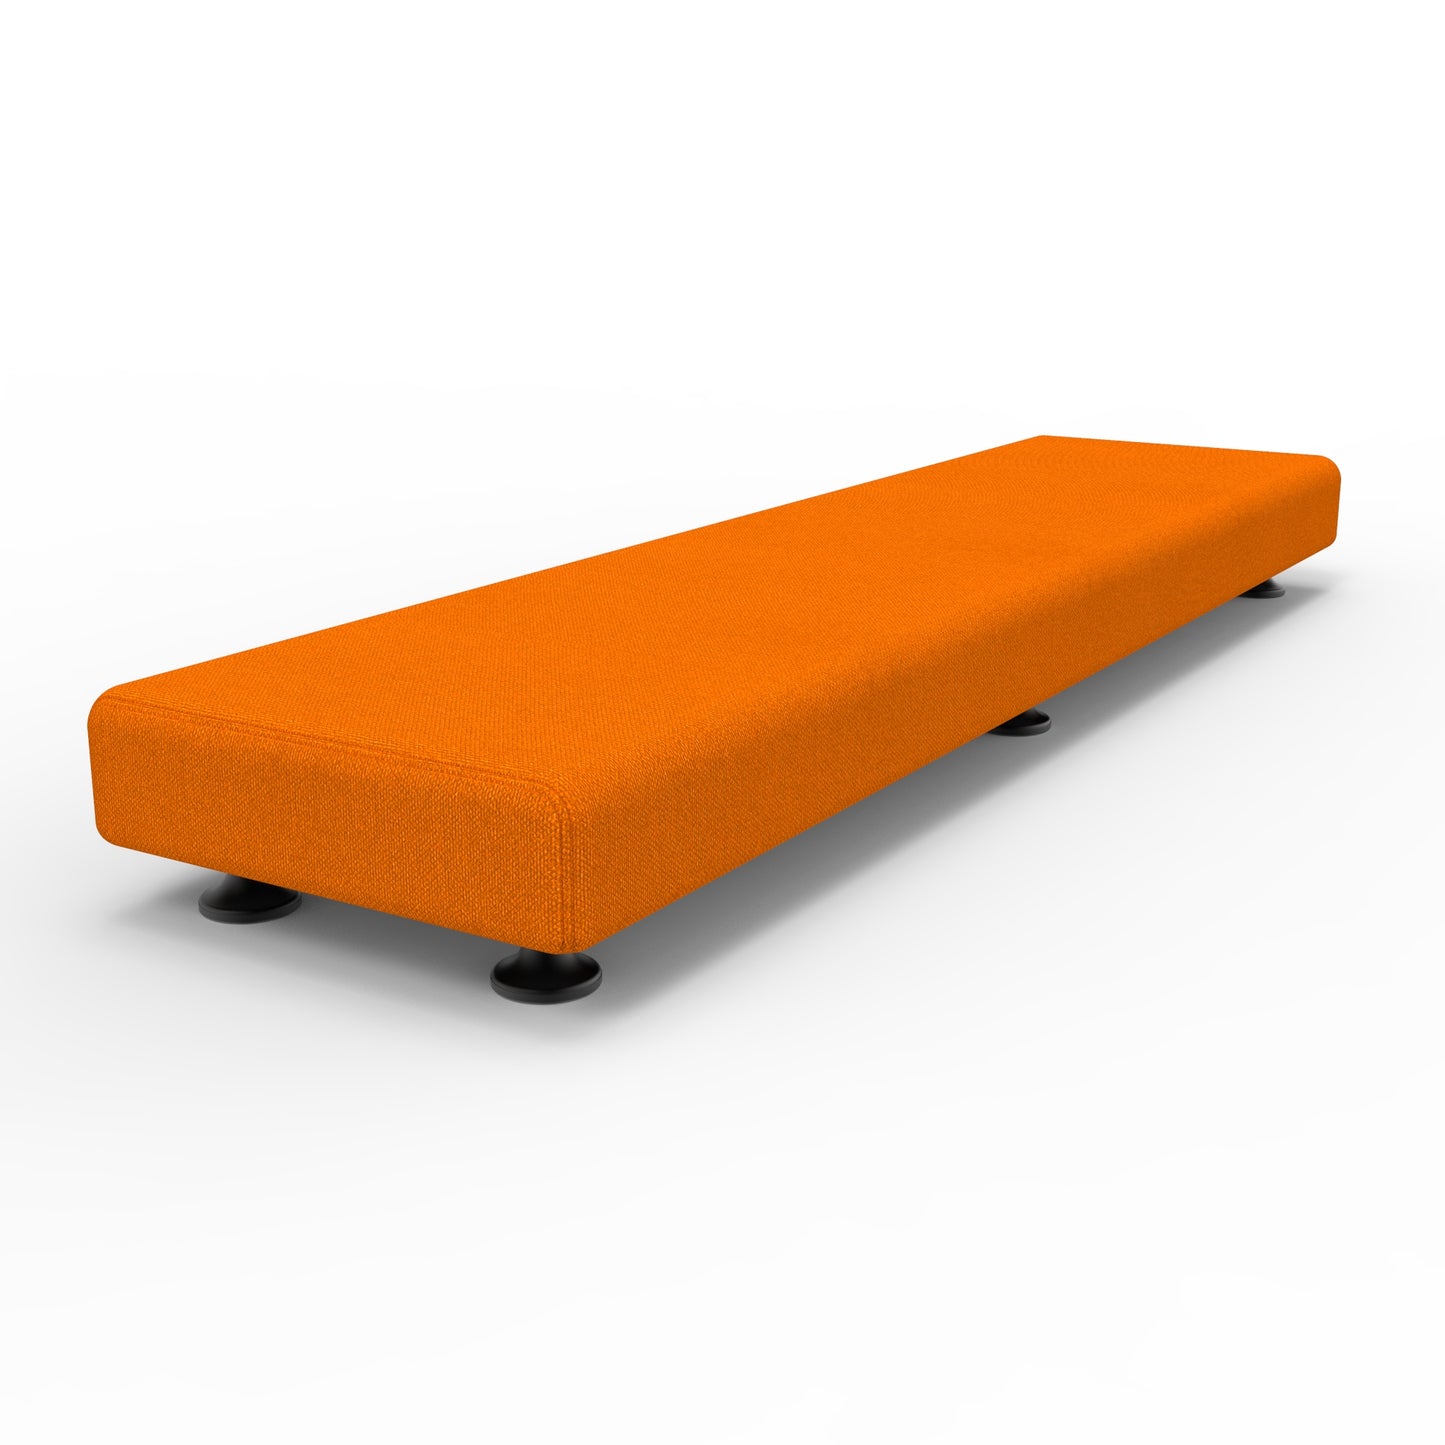 Marco Sonik Soft Seating Rectangle Floor Bench - 46" W x 5" H (LF1204-G1)